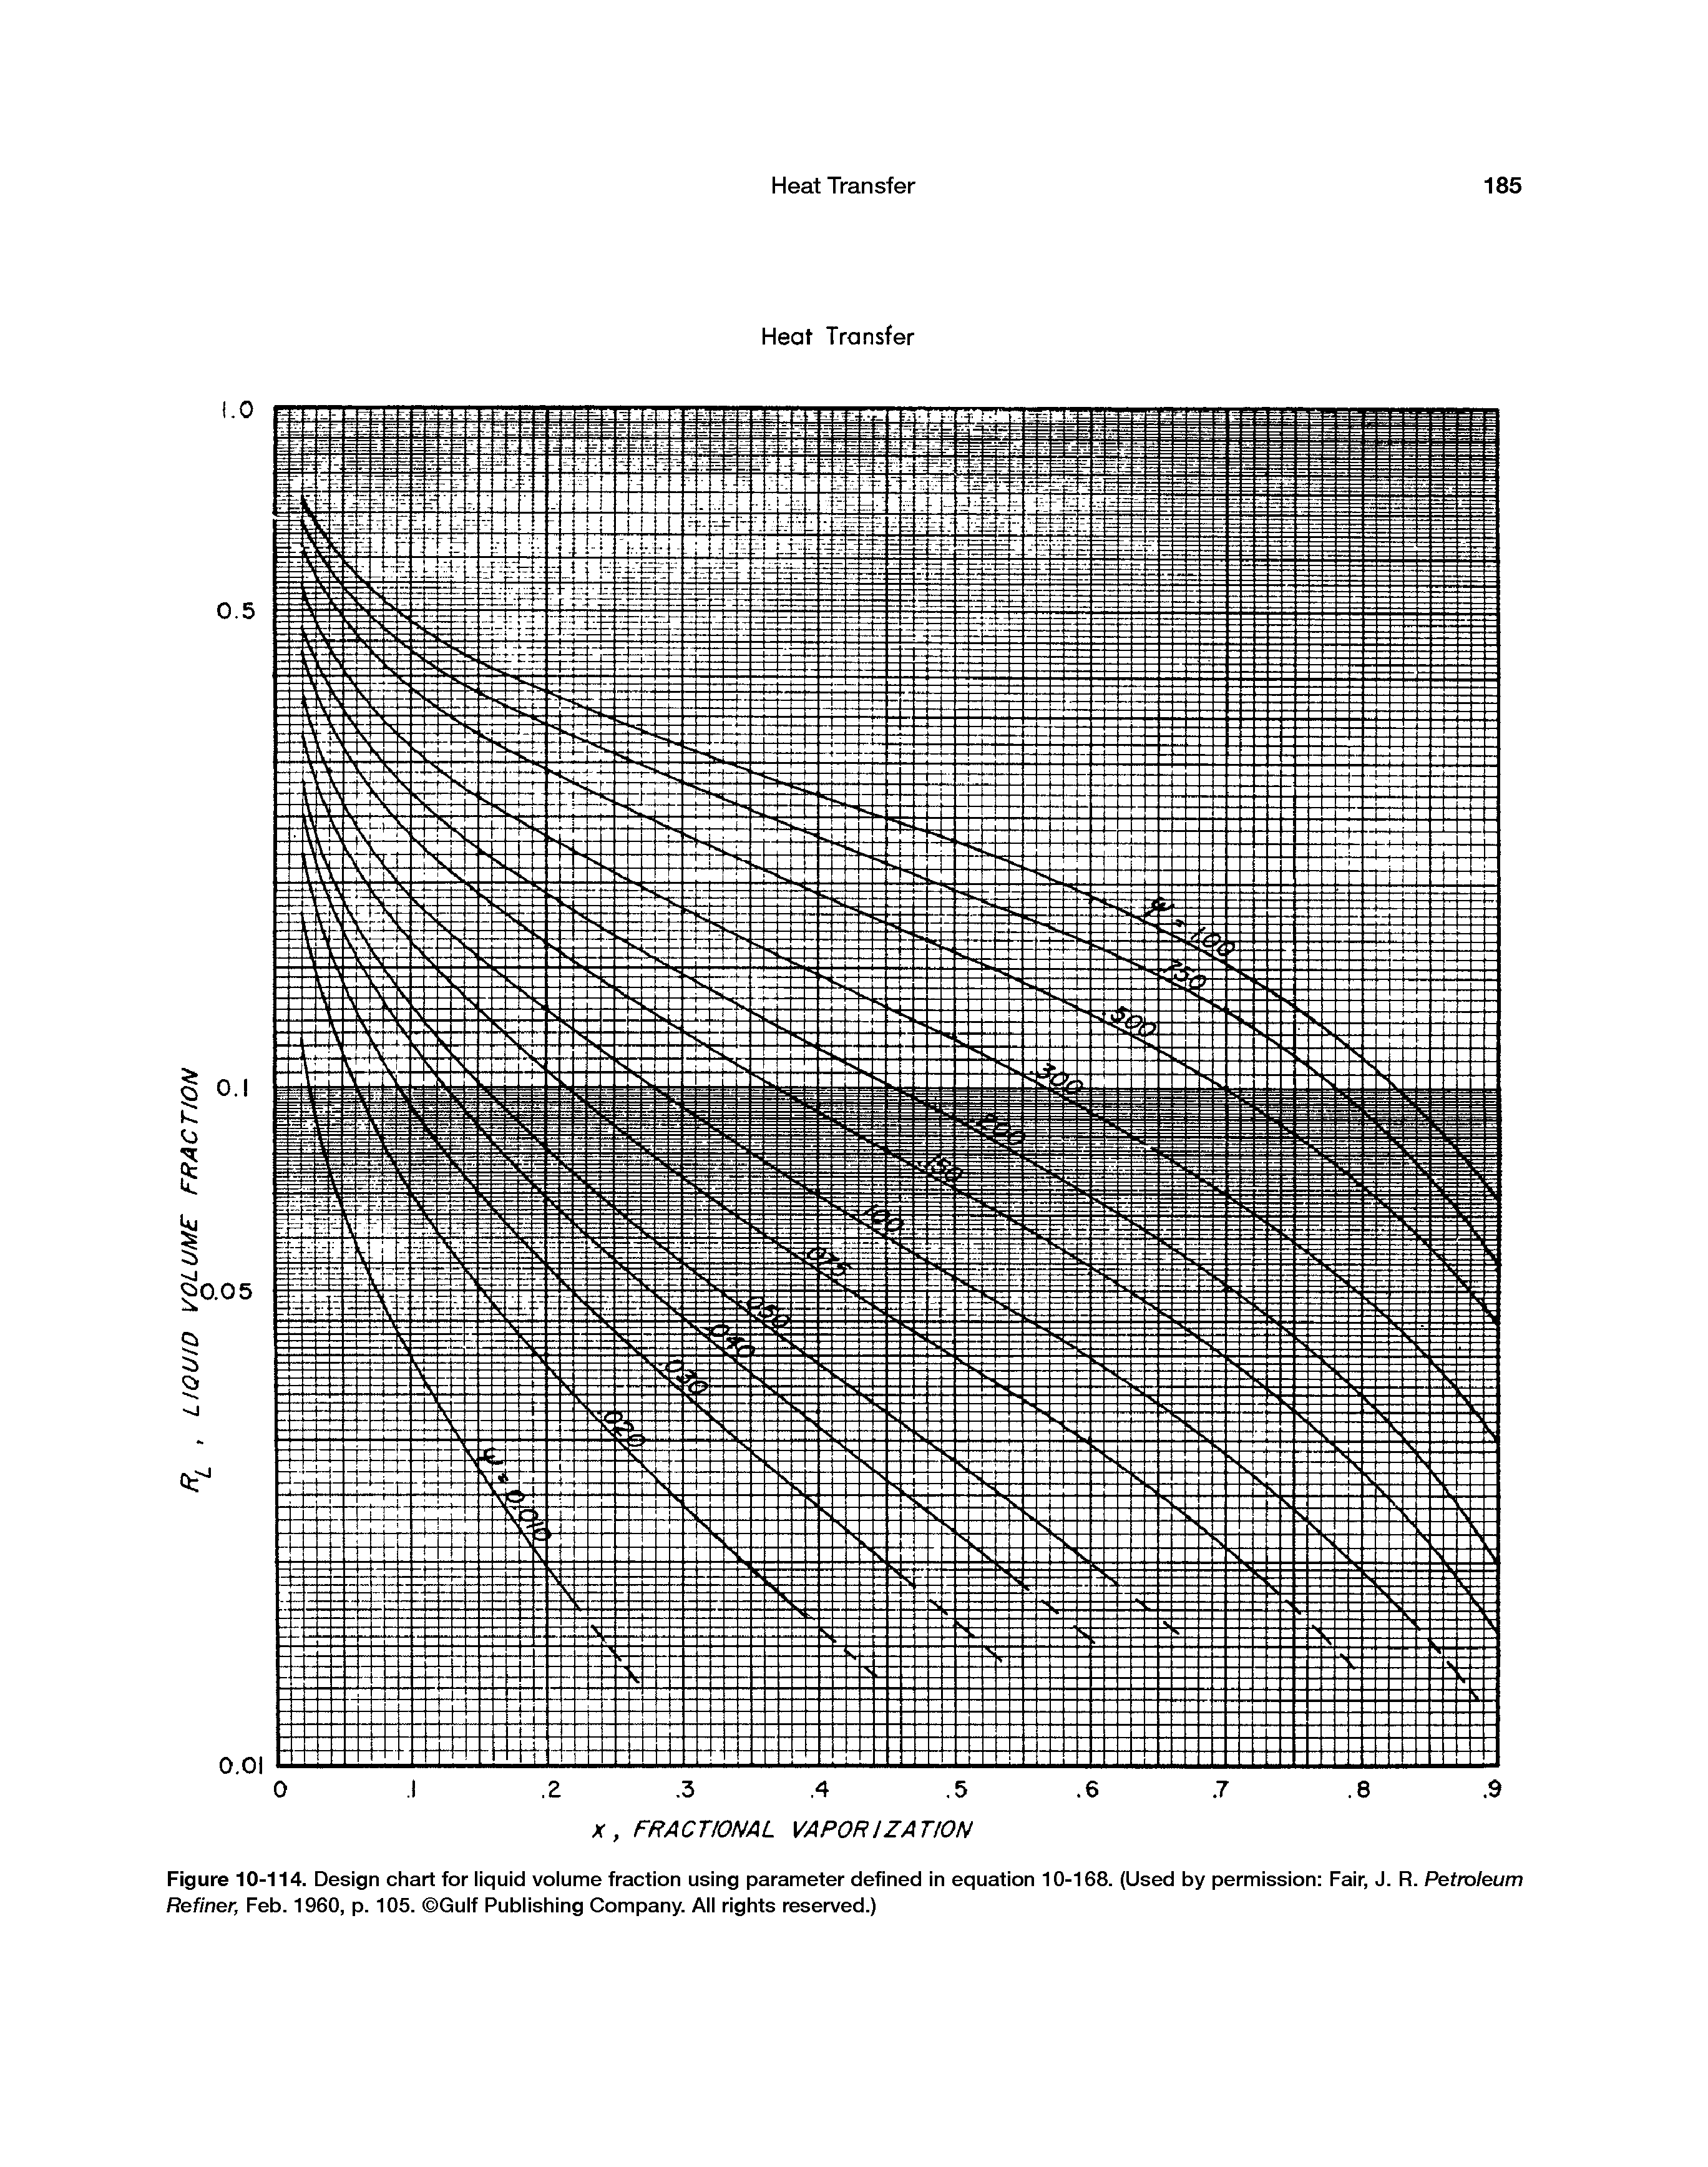 Figure 10-114. Design chart for liquid volume fraction using parameter defined in equation 10-168. (Used by permission Fair, J. R. Petroleum Refiner, Feb. 1960, p. 105. Gulf Publishing Company. All rights reserved.)...